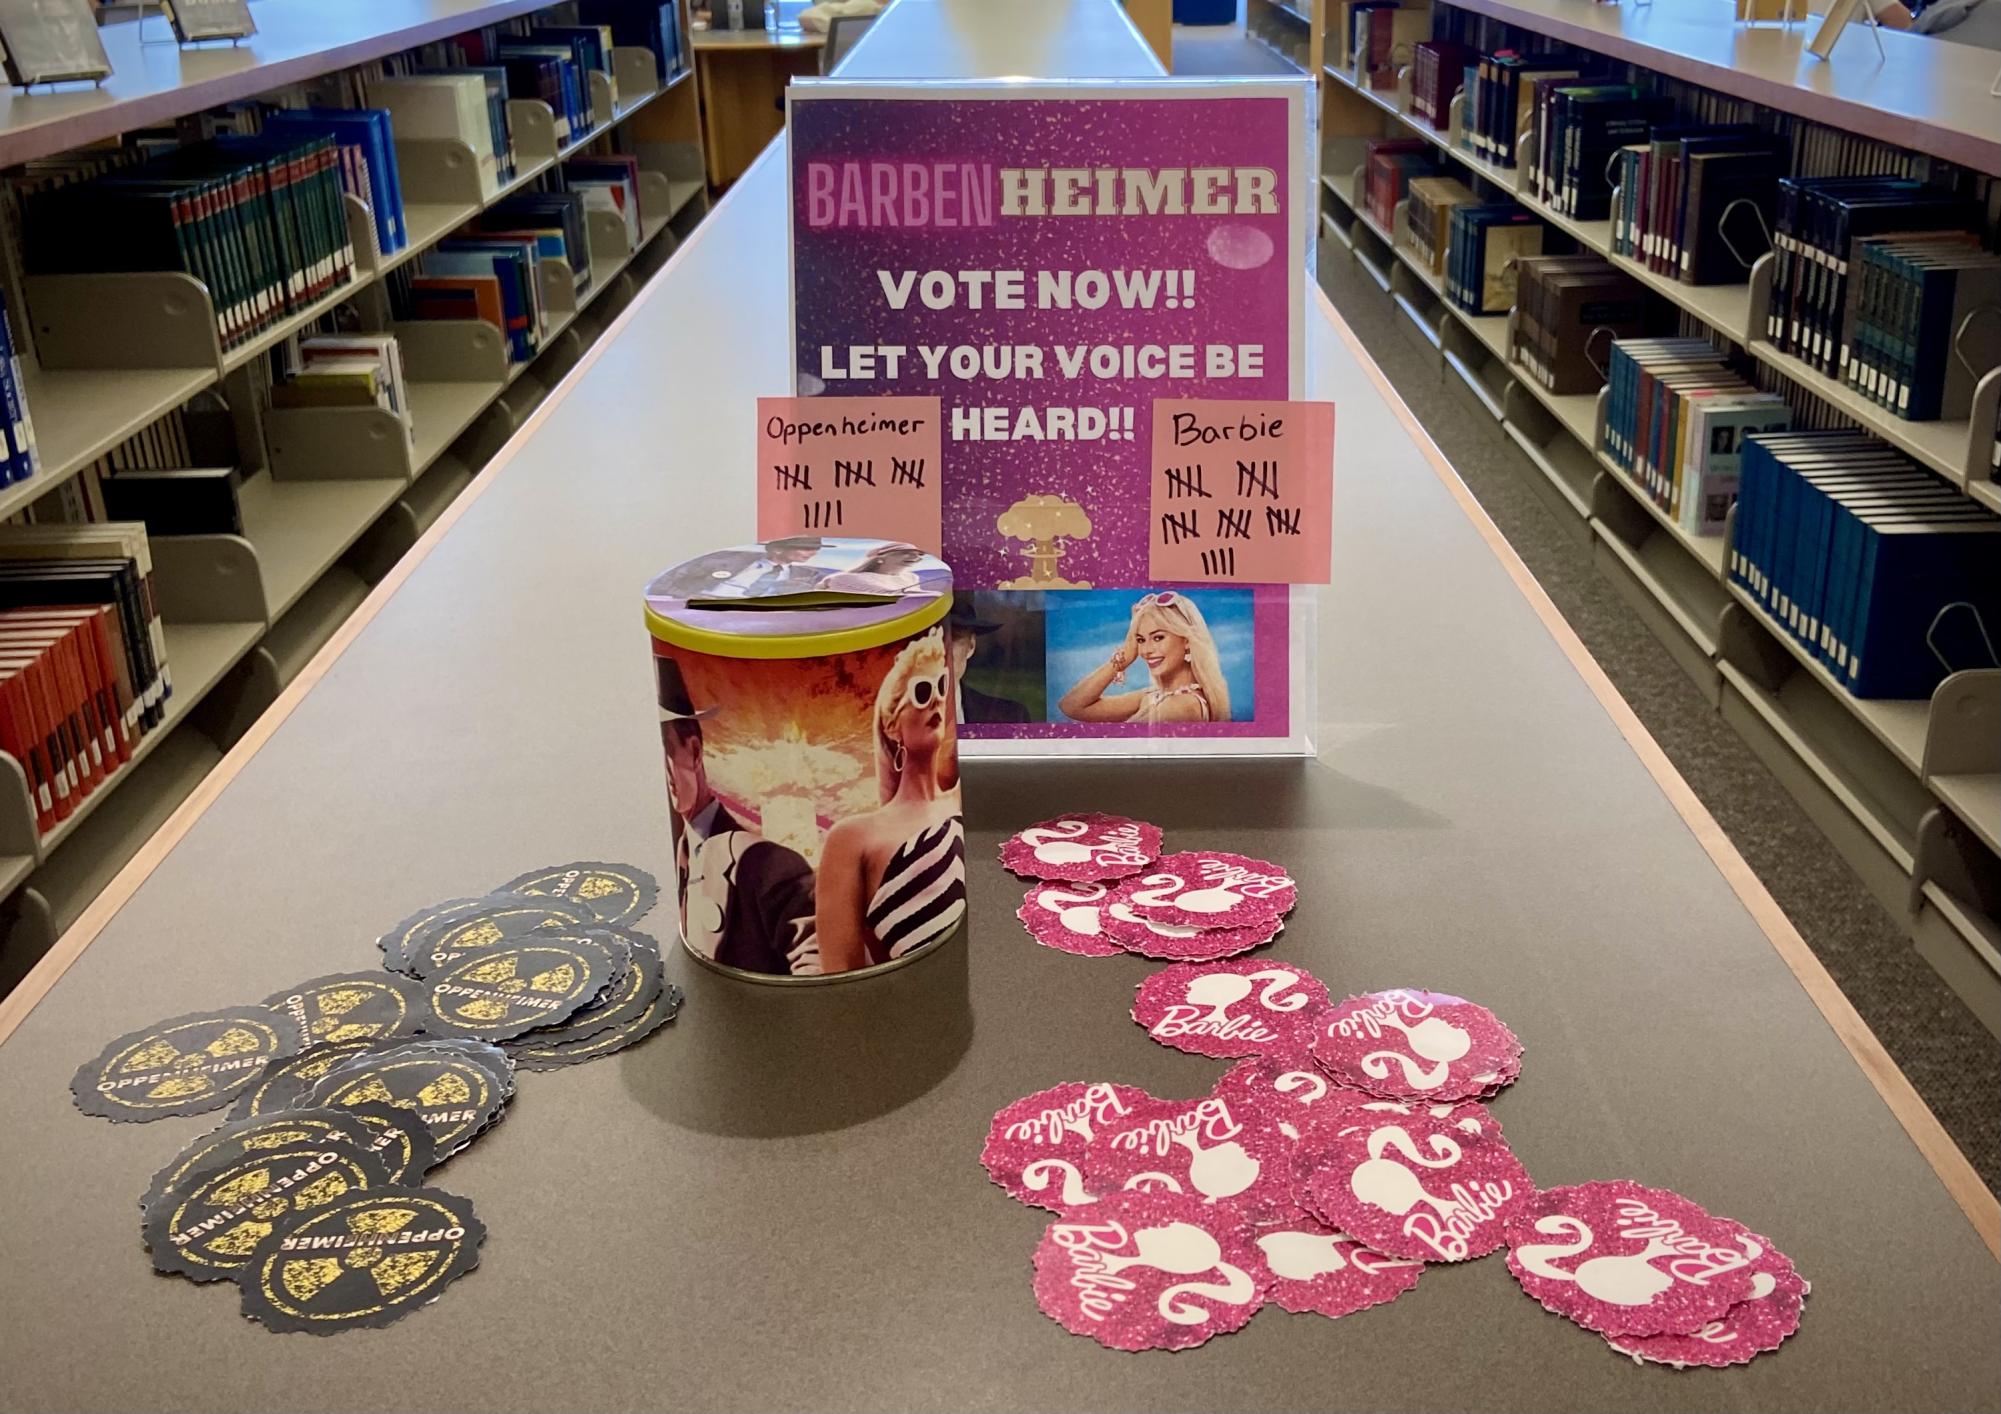 Voting activity for students in the Moorpark College library created in reference to the “Barbenheimer” movement. Photo credit: Bronwyn Smith